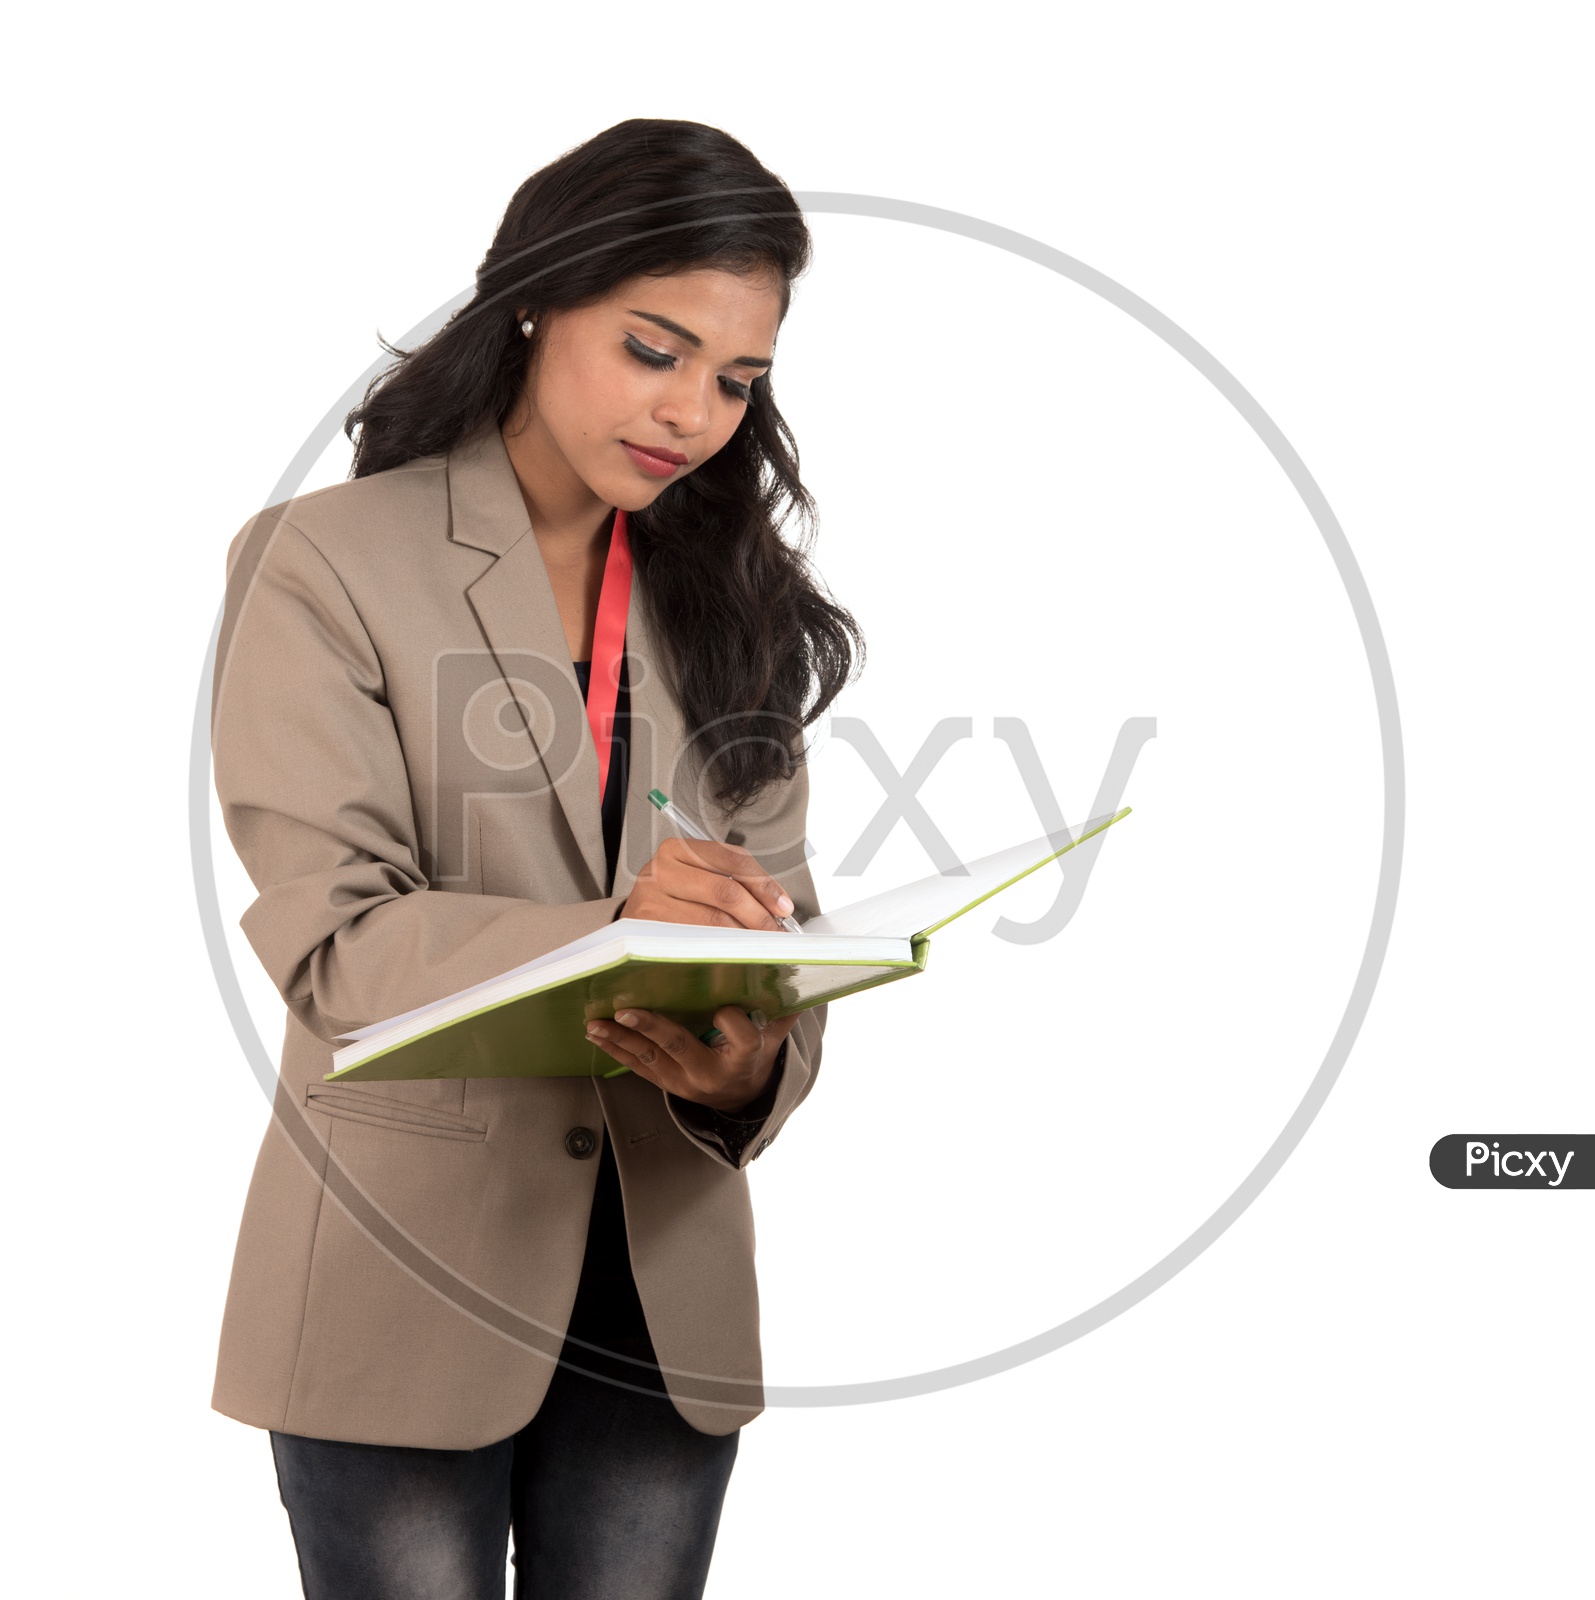 Indian business woman writing in a book